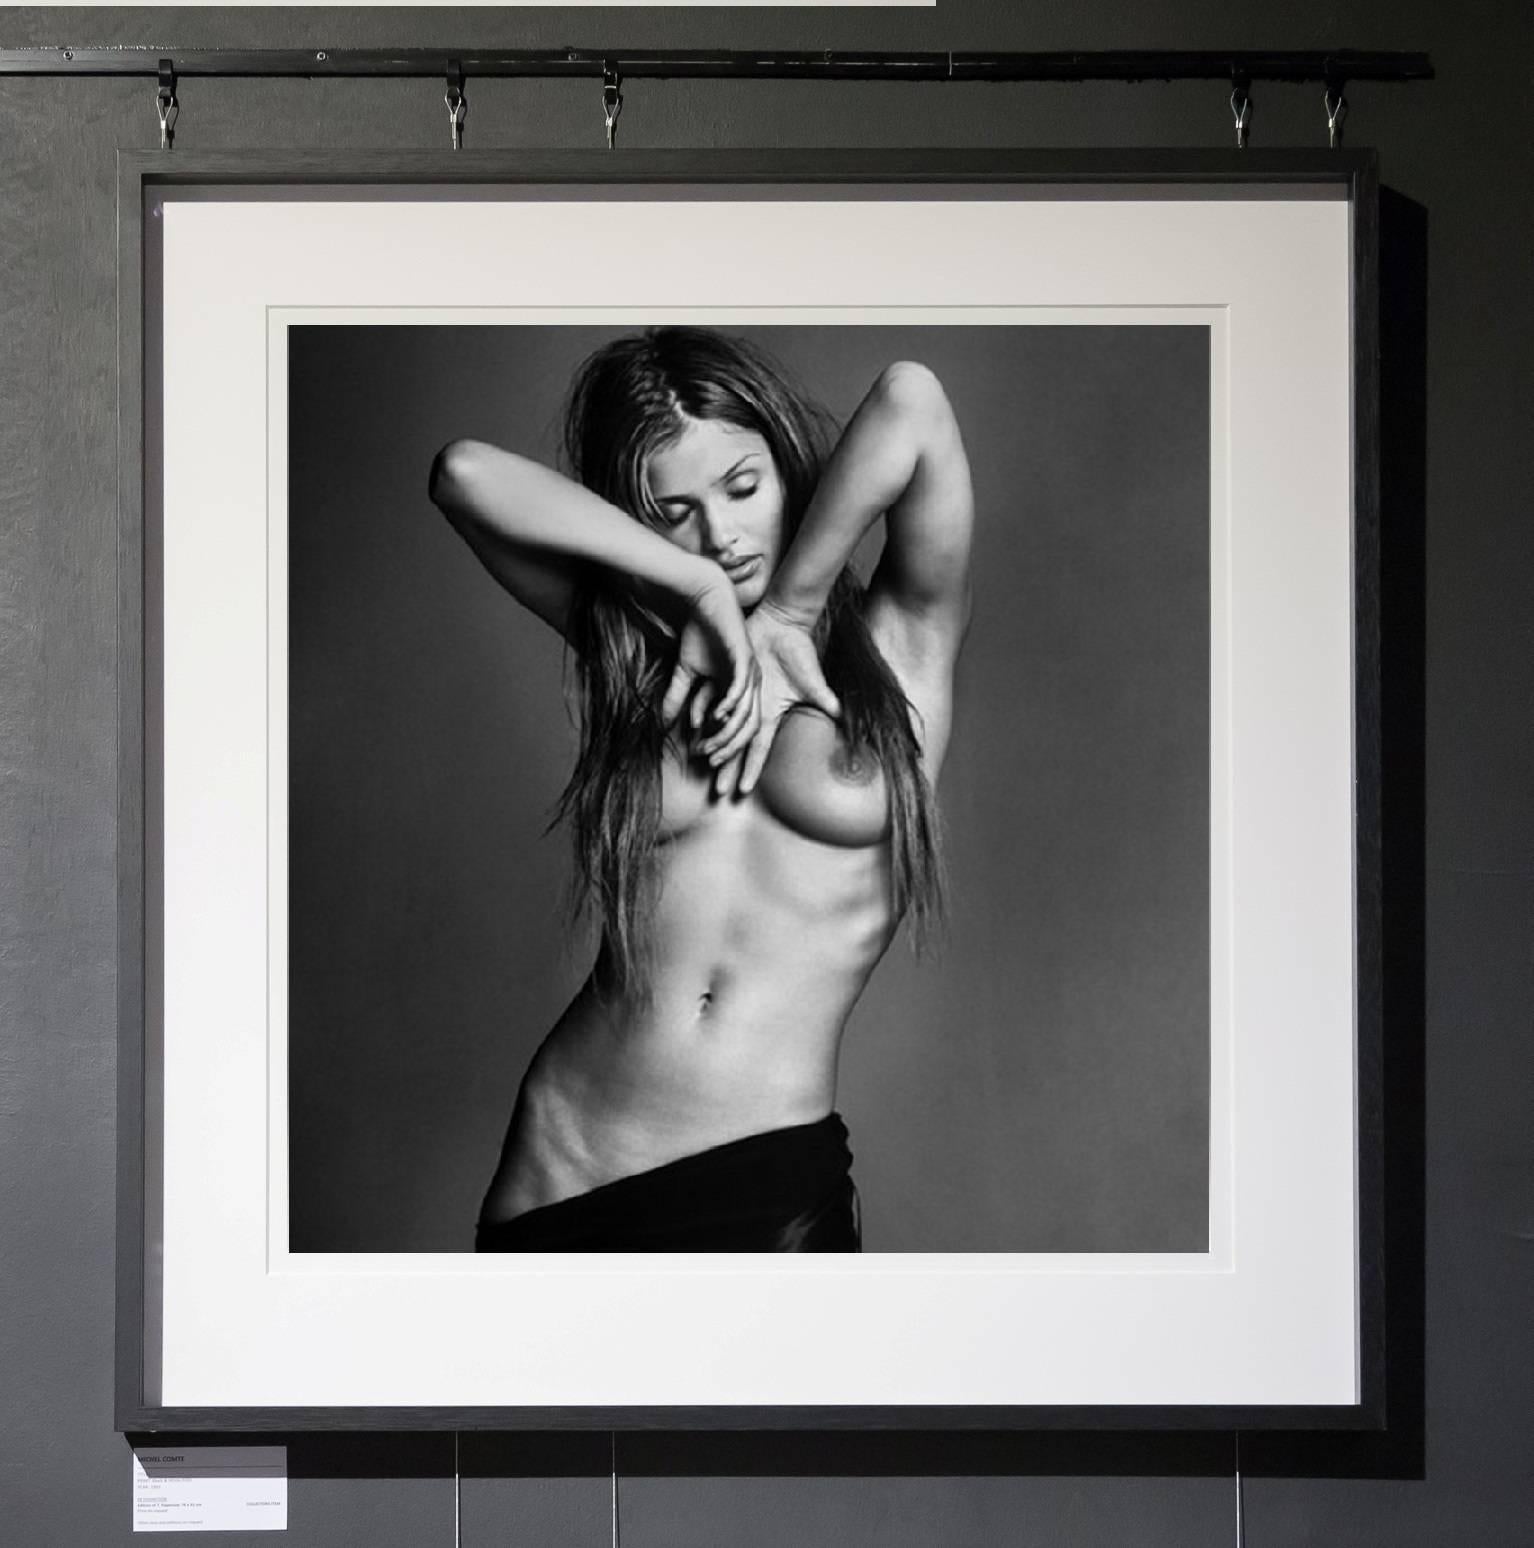 Helena Christensen III - iconic nude portrait of the supermodel in b&w - Photograph by Michel Comte